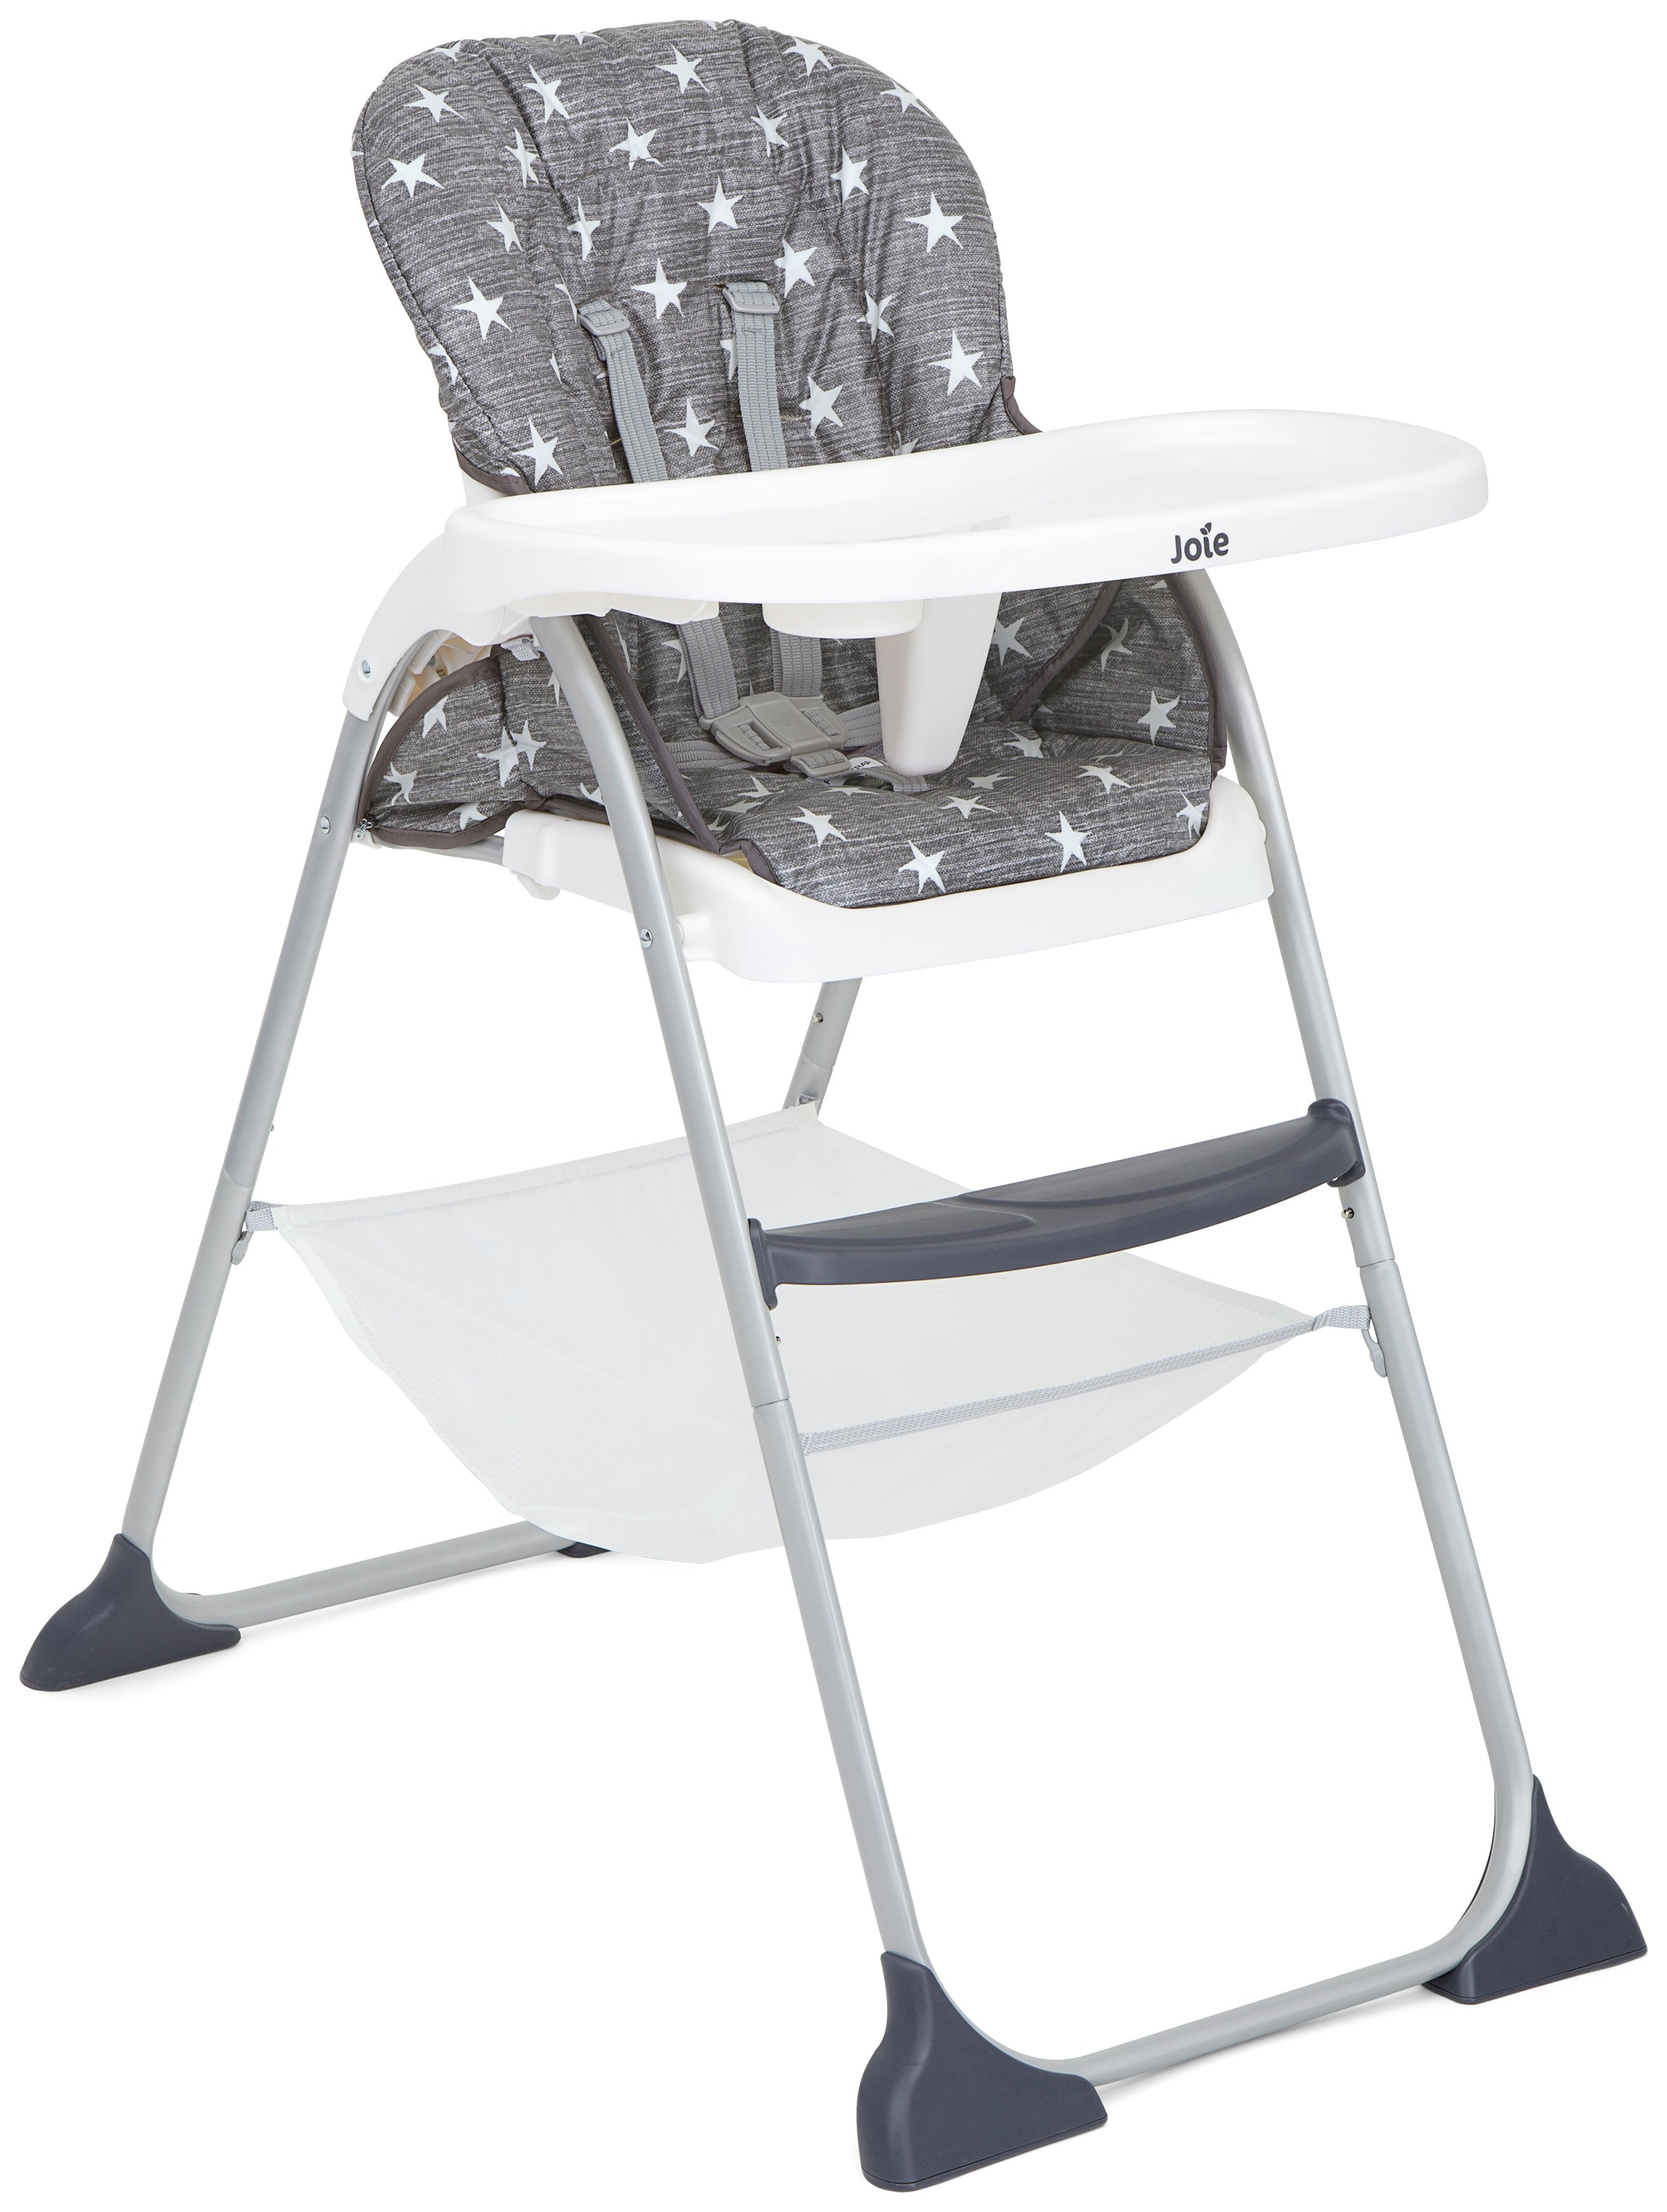 Joie Mimzy Snacker Highchair Review